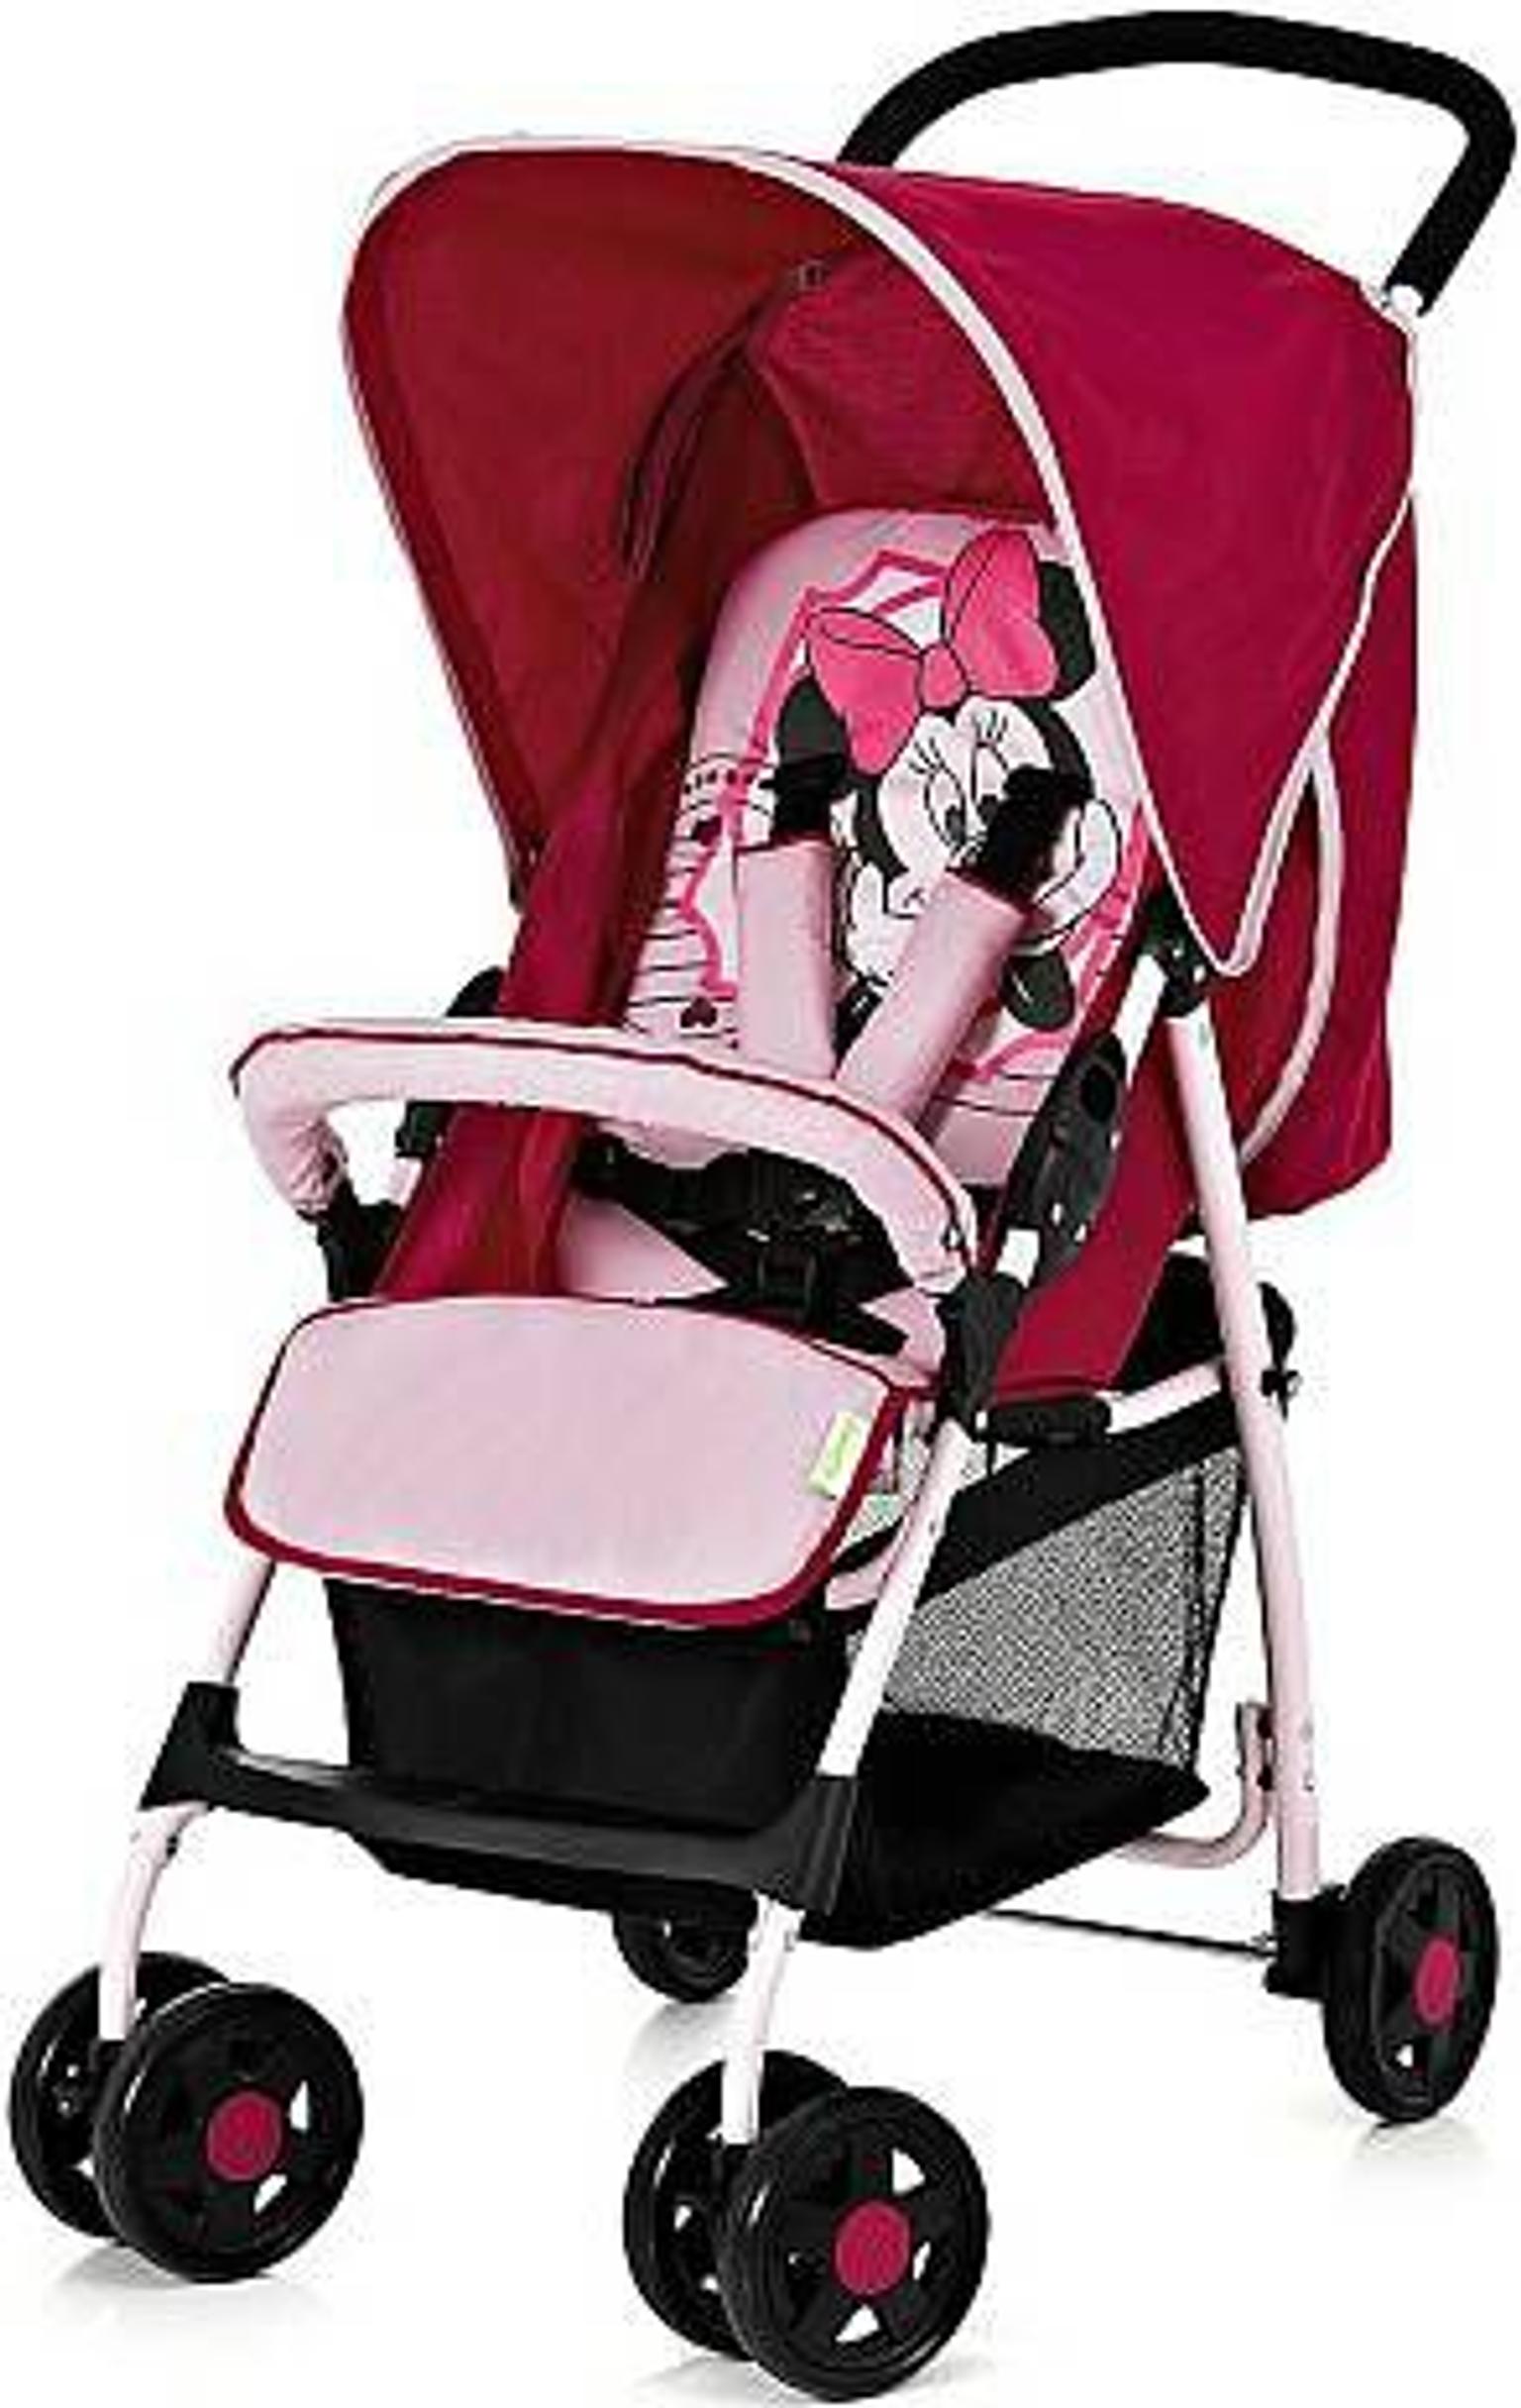 hauck minnie mouse stroller